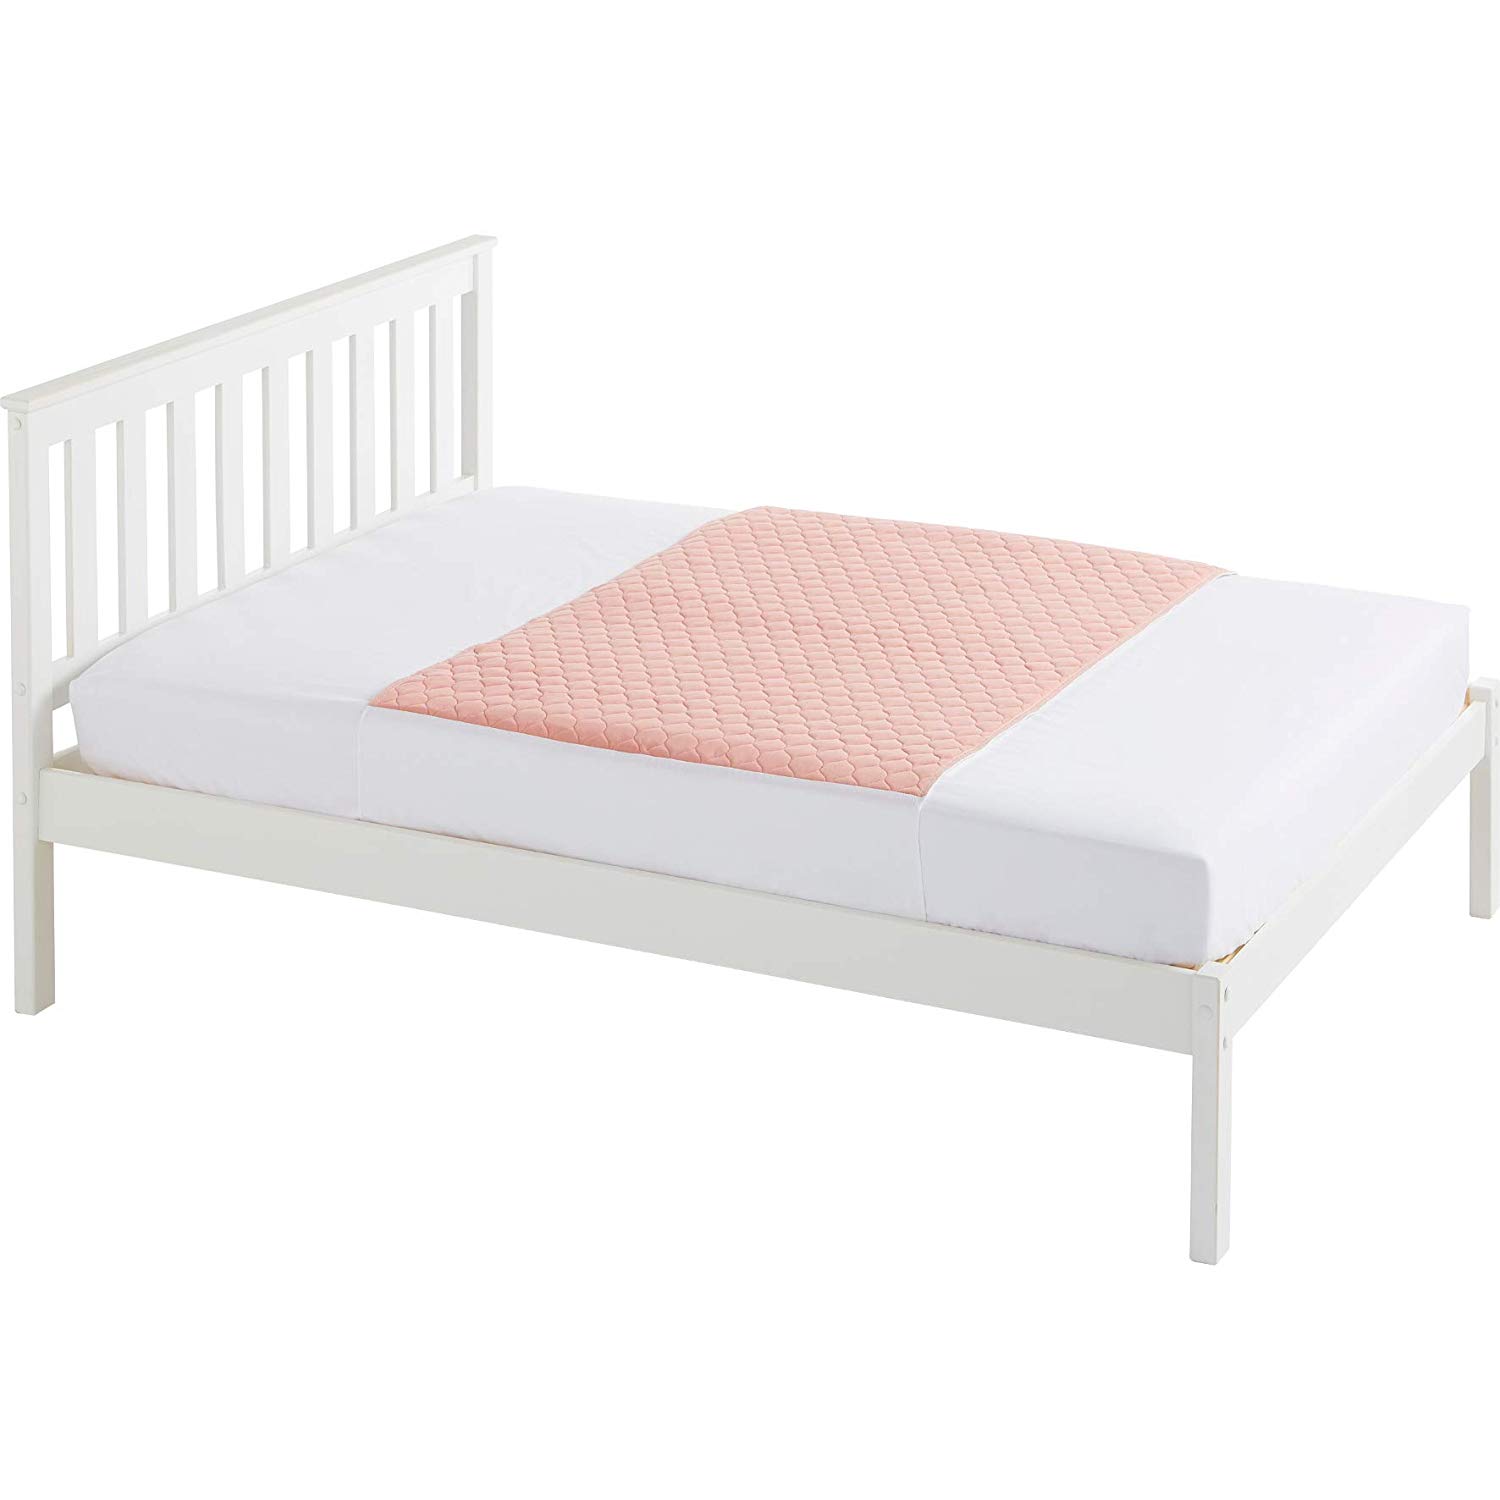 Capatex CMI BP-941 Kylie4 Pink w Kylie Bed Protector with Wings 91 cm x 139 cm Size 4